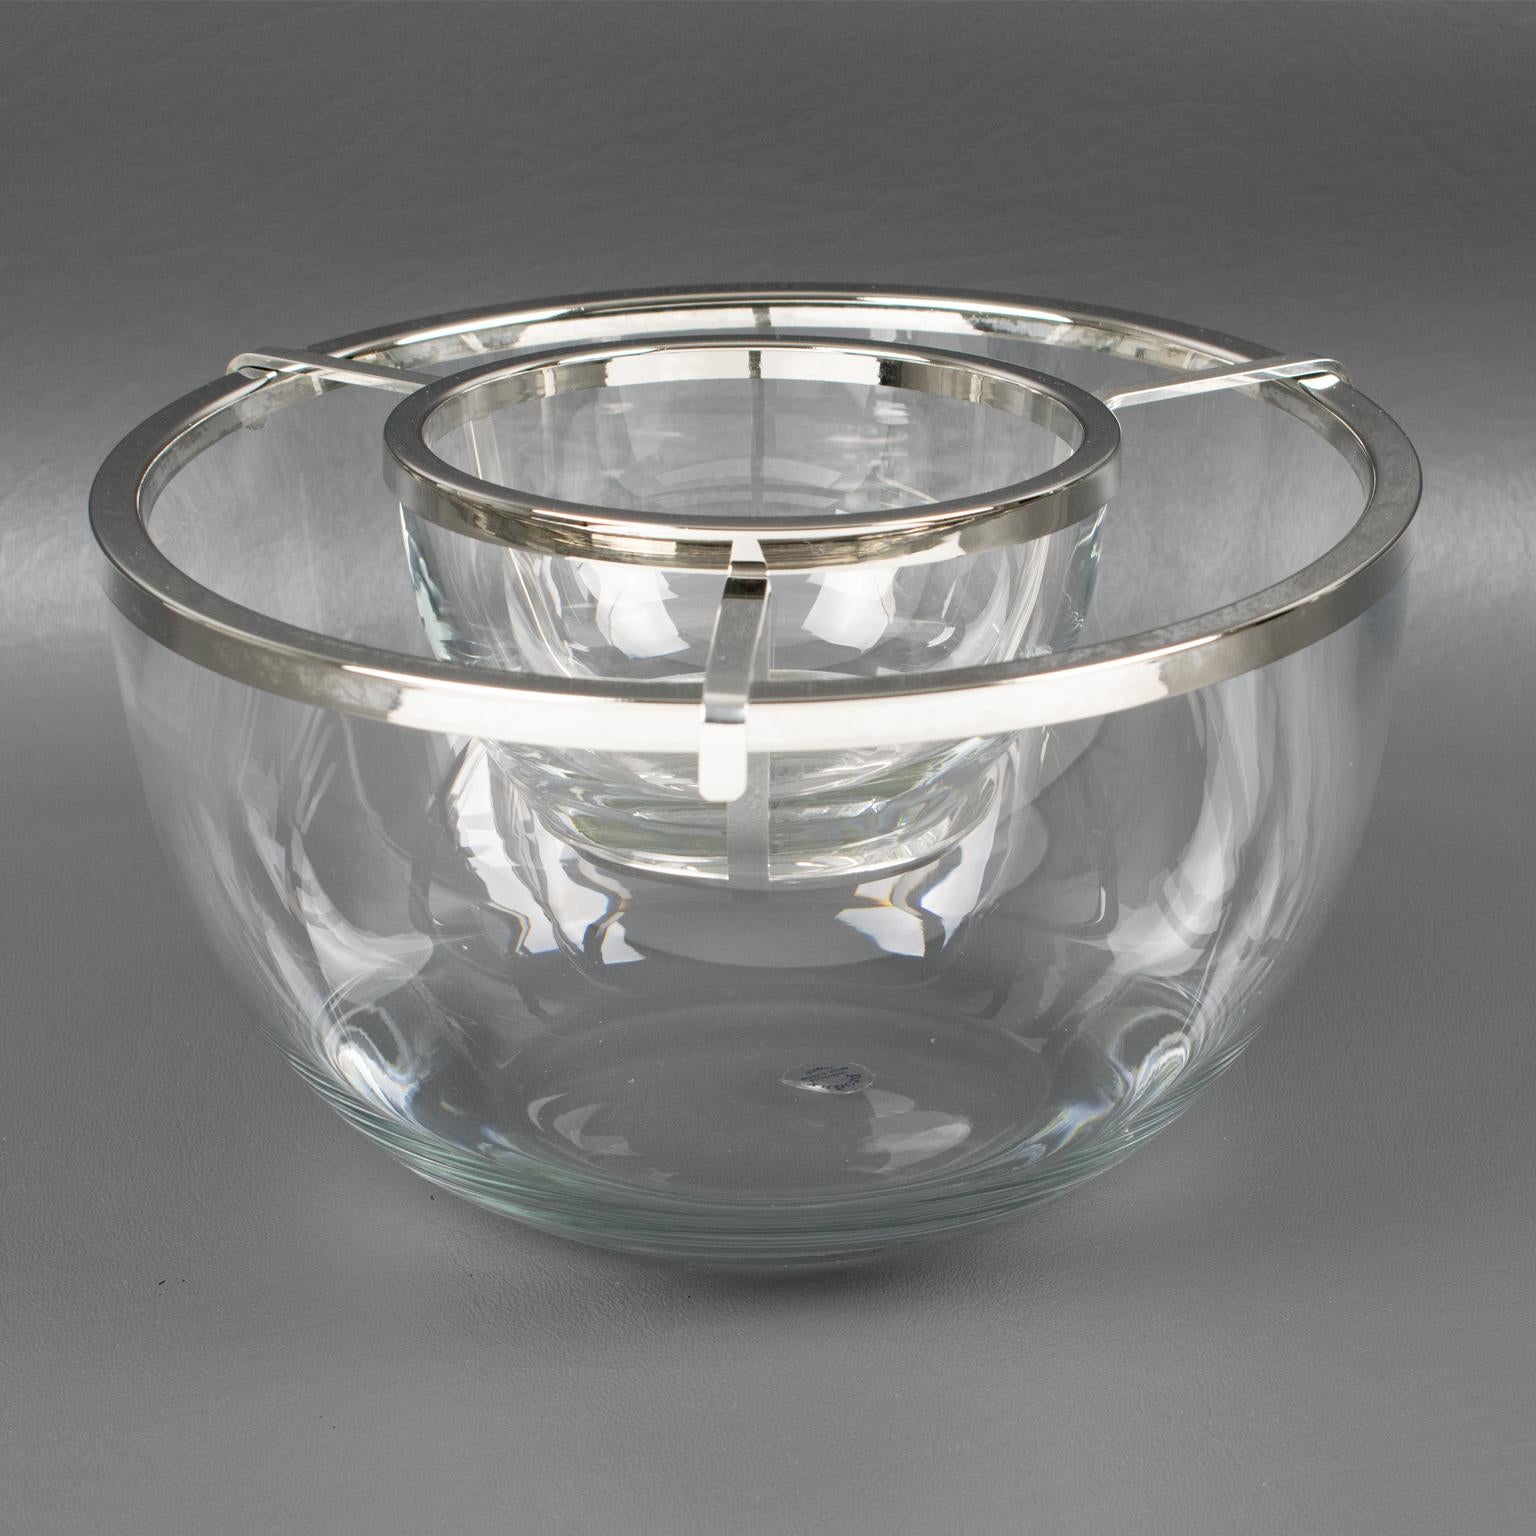 Stylish modernist Mid-Century silver plate and crystal caviar serving bowl, dish, or chiller designed by French silversmith St Hilaire for its Produx line in the 1970s. Minimalist chic design with geometric streamline shape, featuring a large